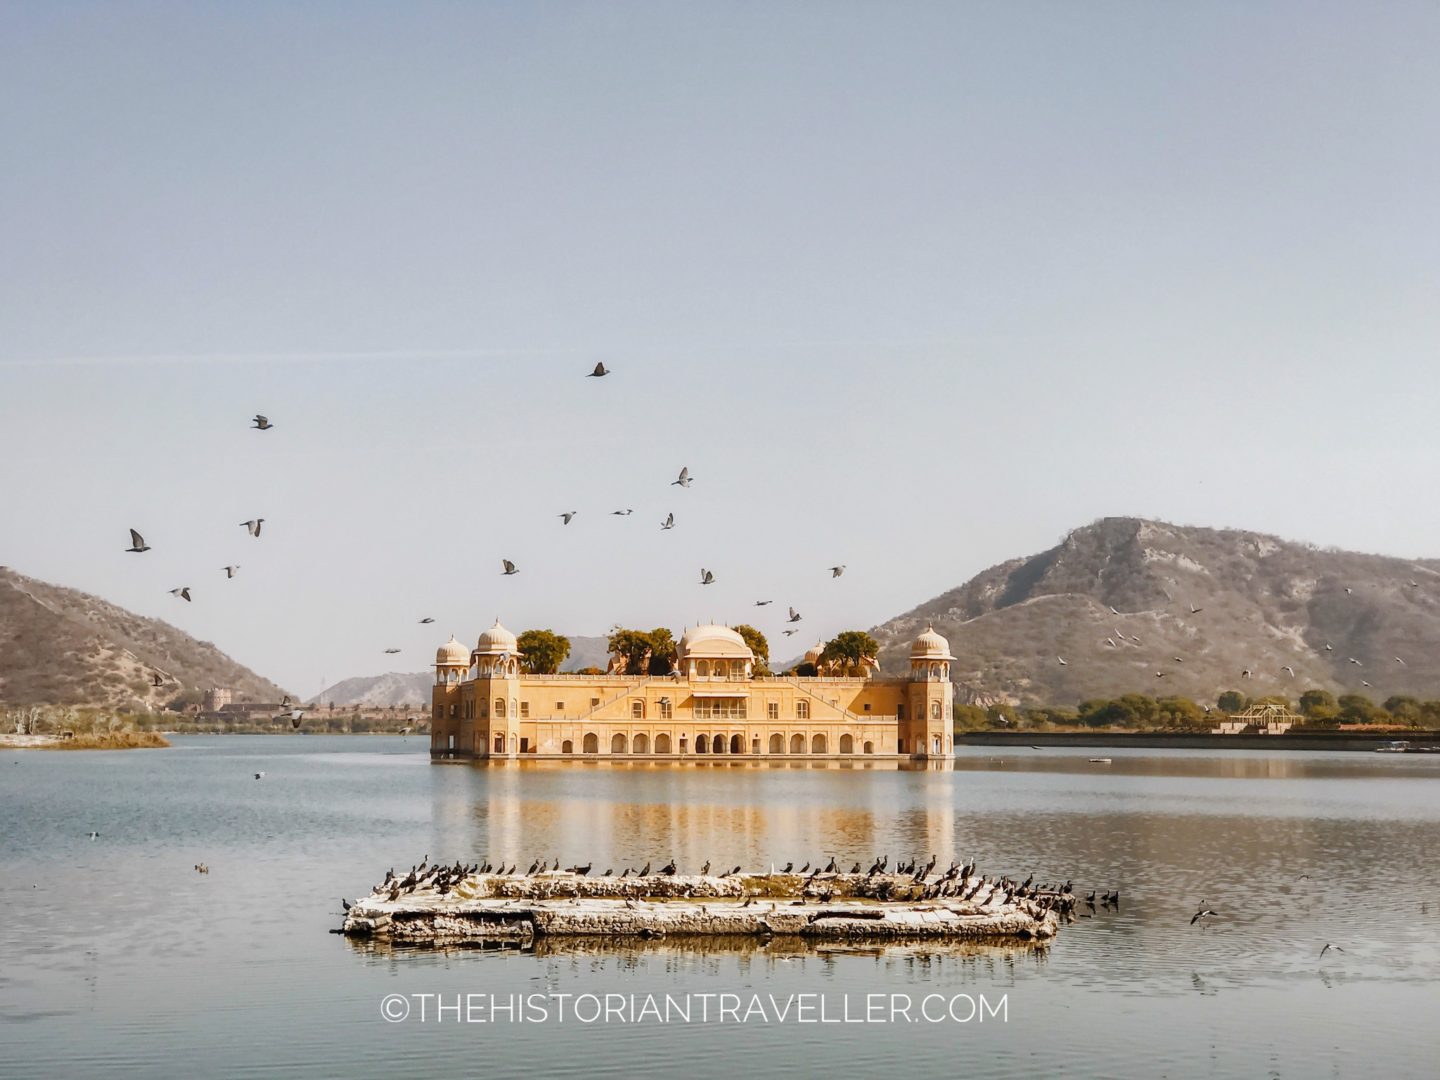 View of the Jal Mahal in Jaipur